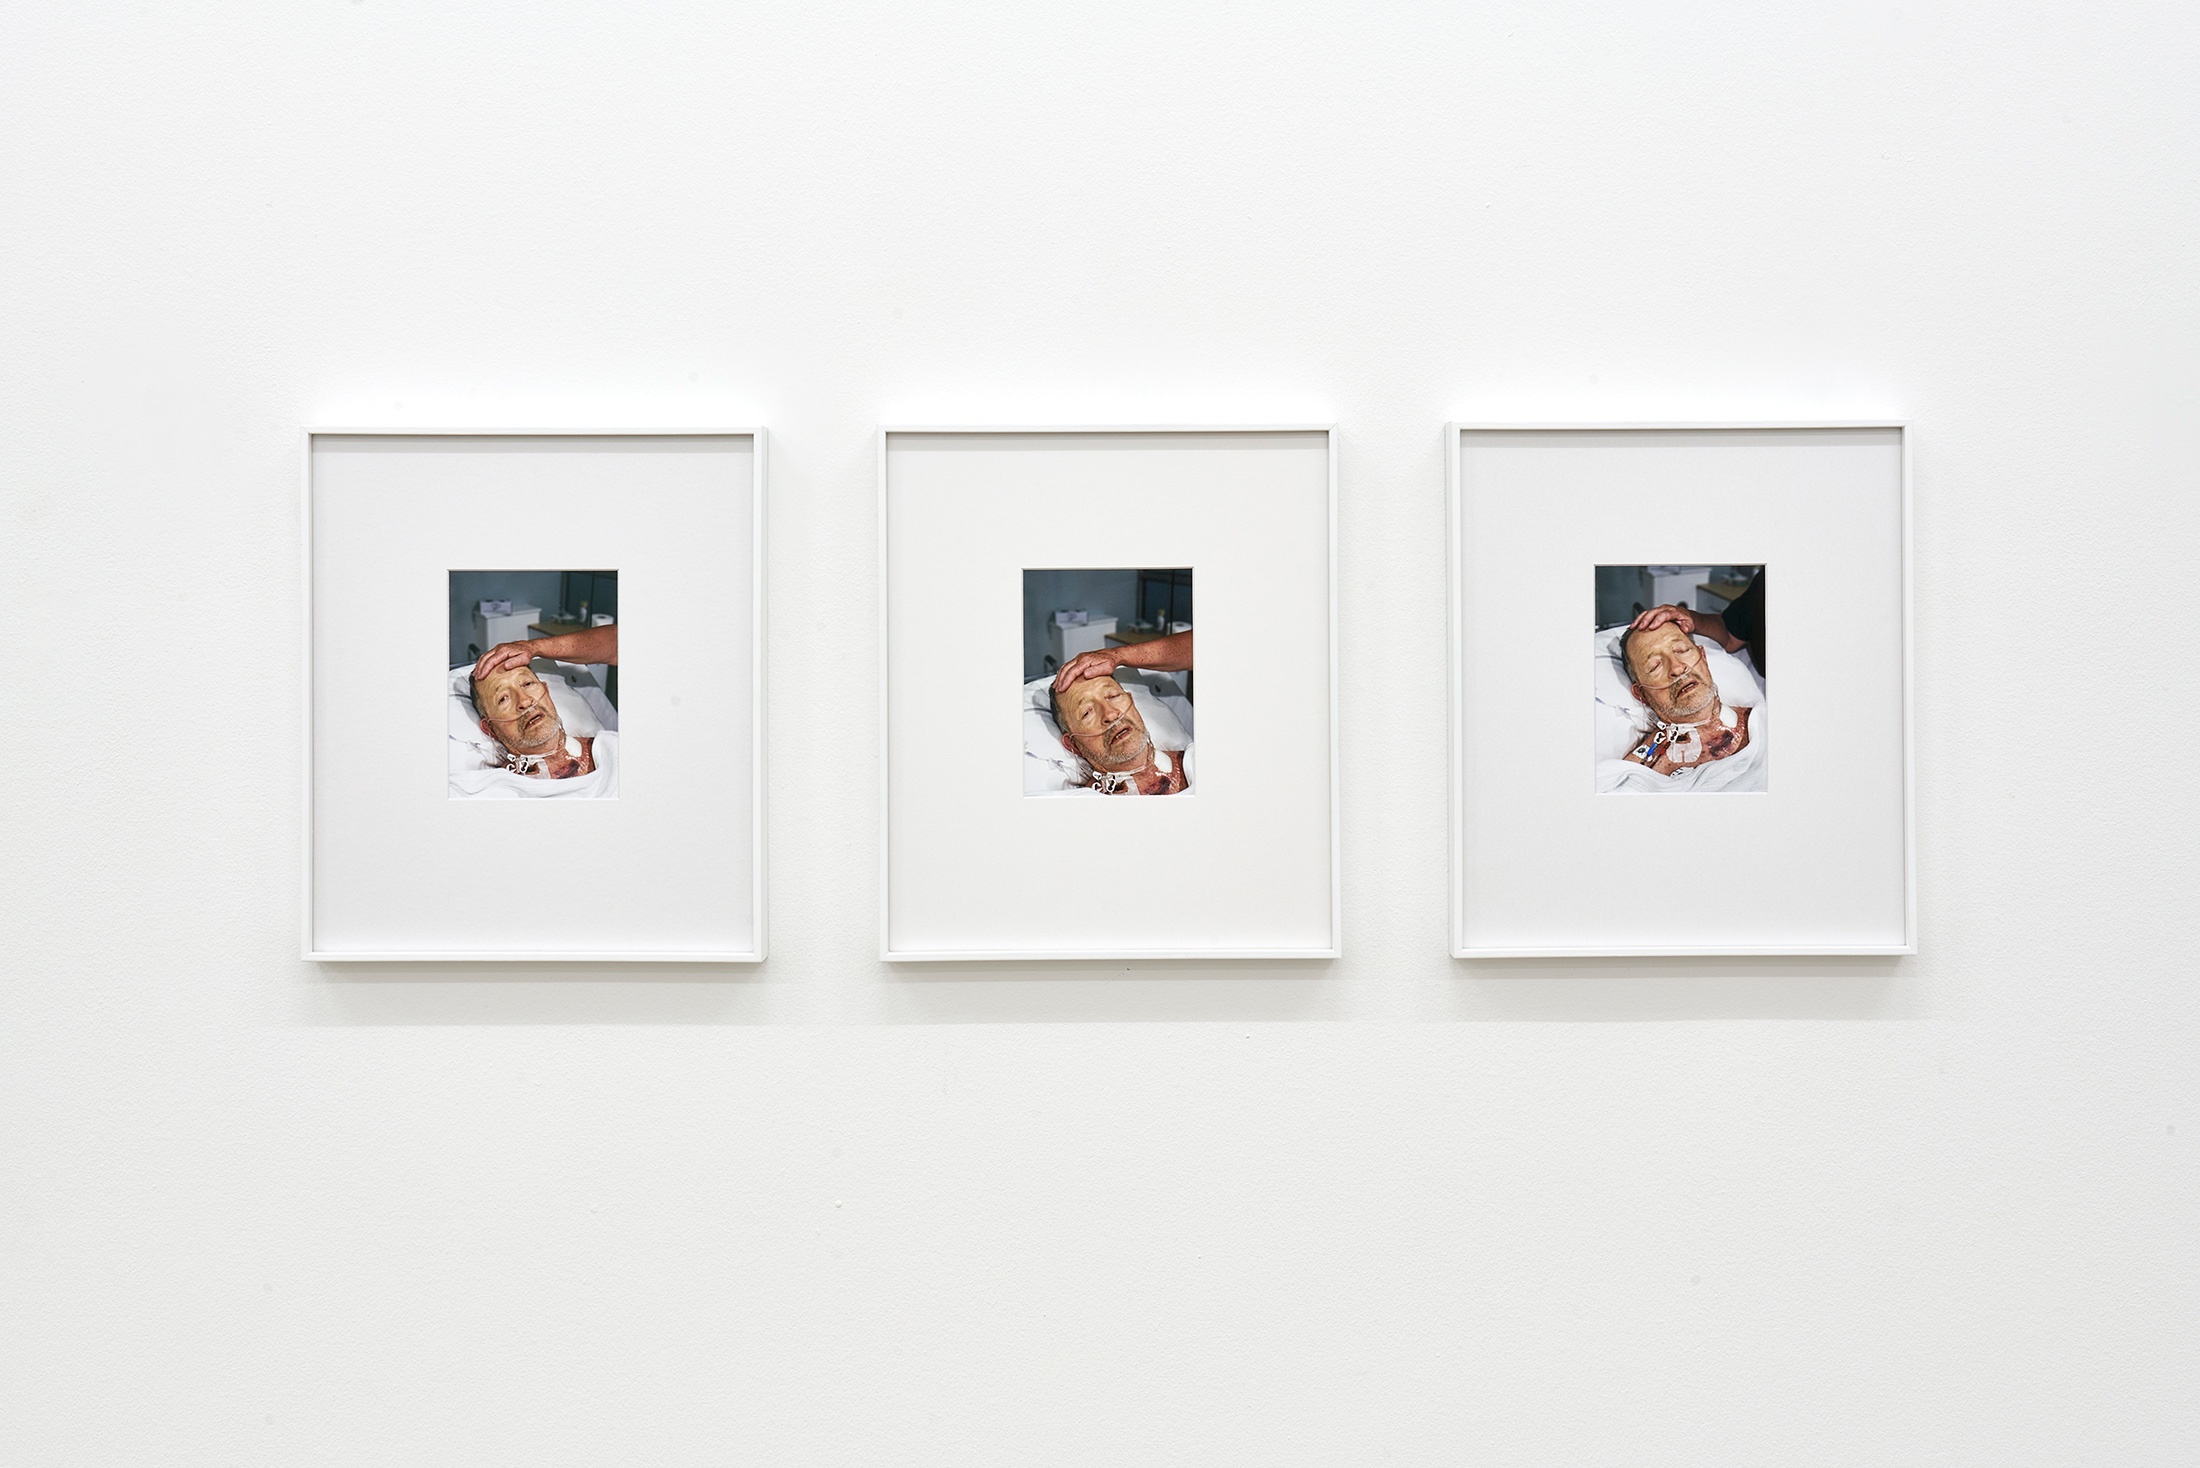 Installation photograph that shows Pieter Hugo’s framed photographic triptych ‘944-03-03, MALE, MARRIED, 2021-12-21, CAPE TOWN, NATURAL CAUSES’ mounted on a white wall.
